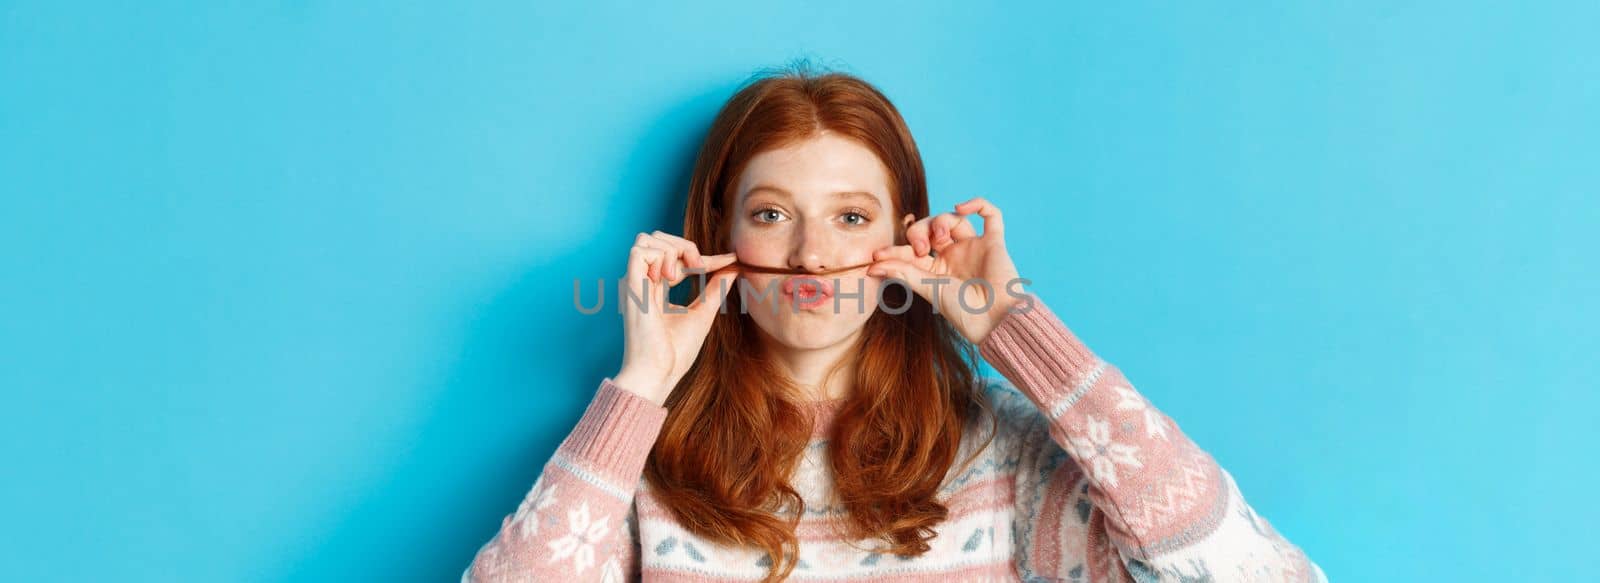 Close-up of silly and funny redhead girl making moustache with hair strand and puckered lips, grimacing against blue background.